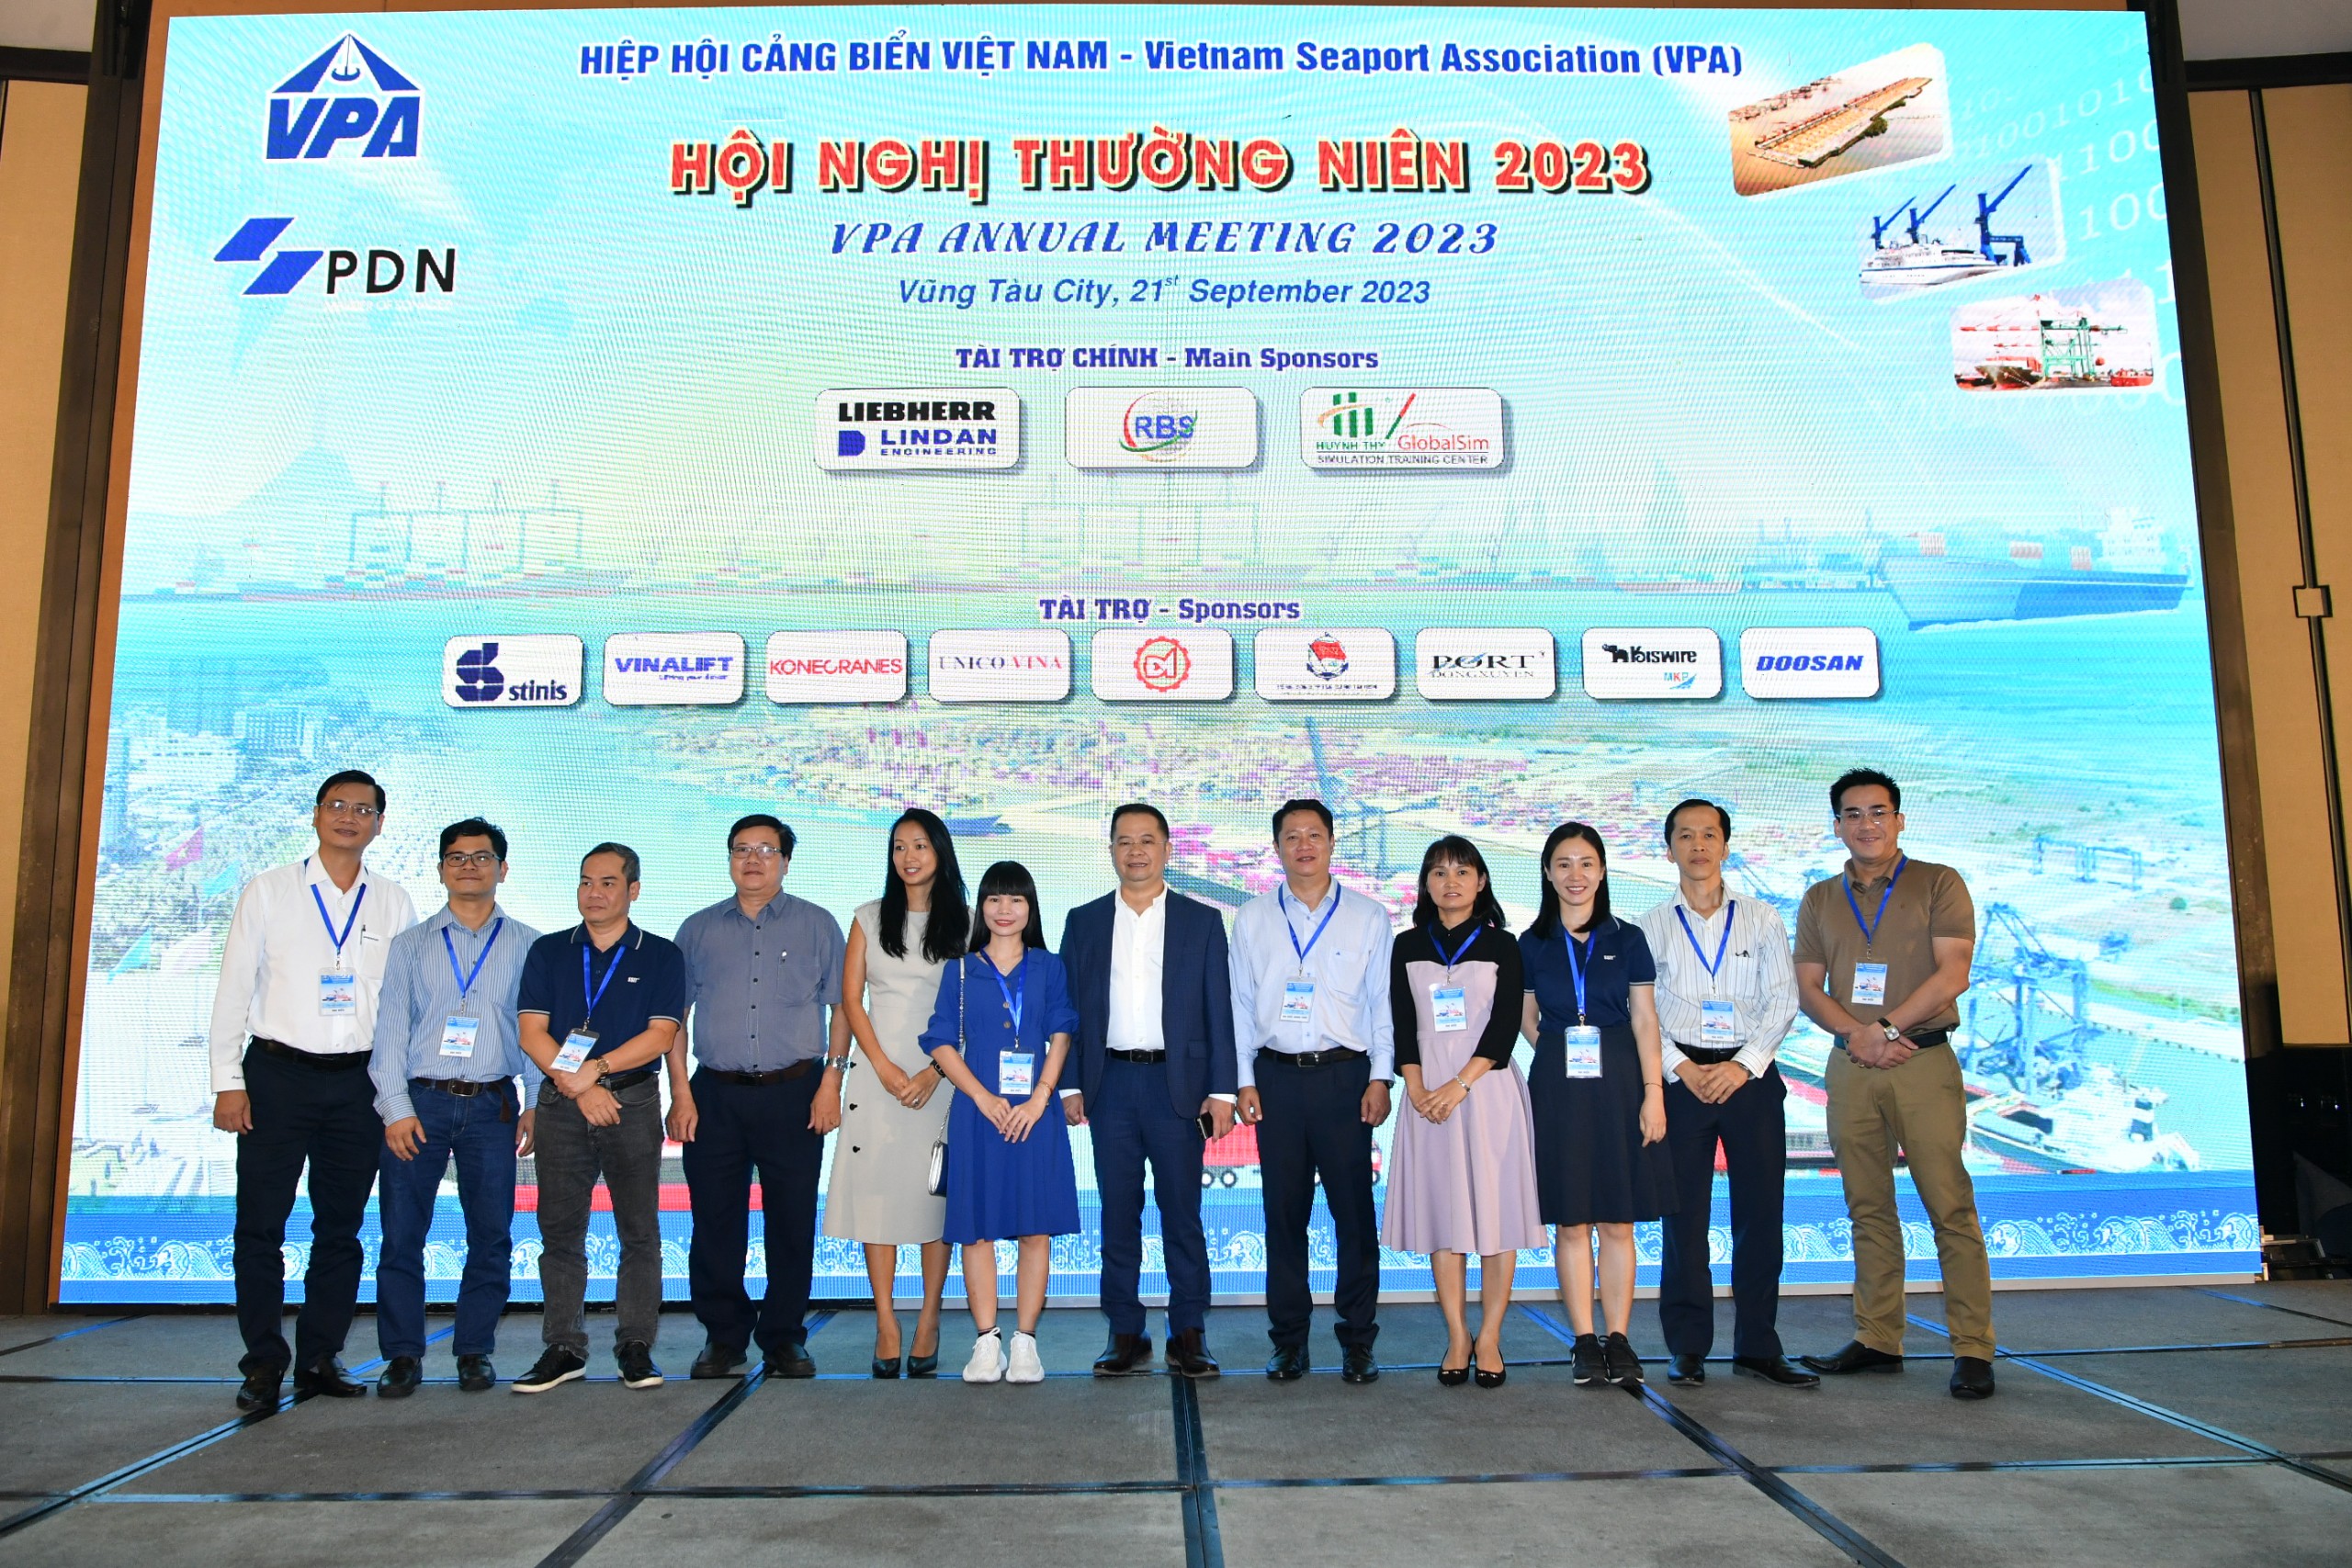 SSIT team joined The Vietnam Seaports Association (VPA) Annual Meeting 2023